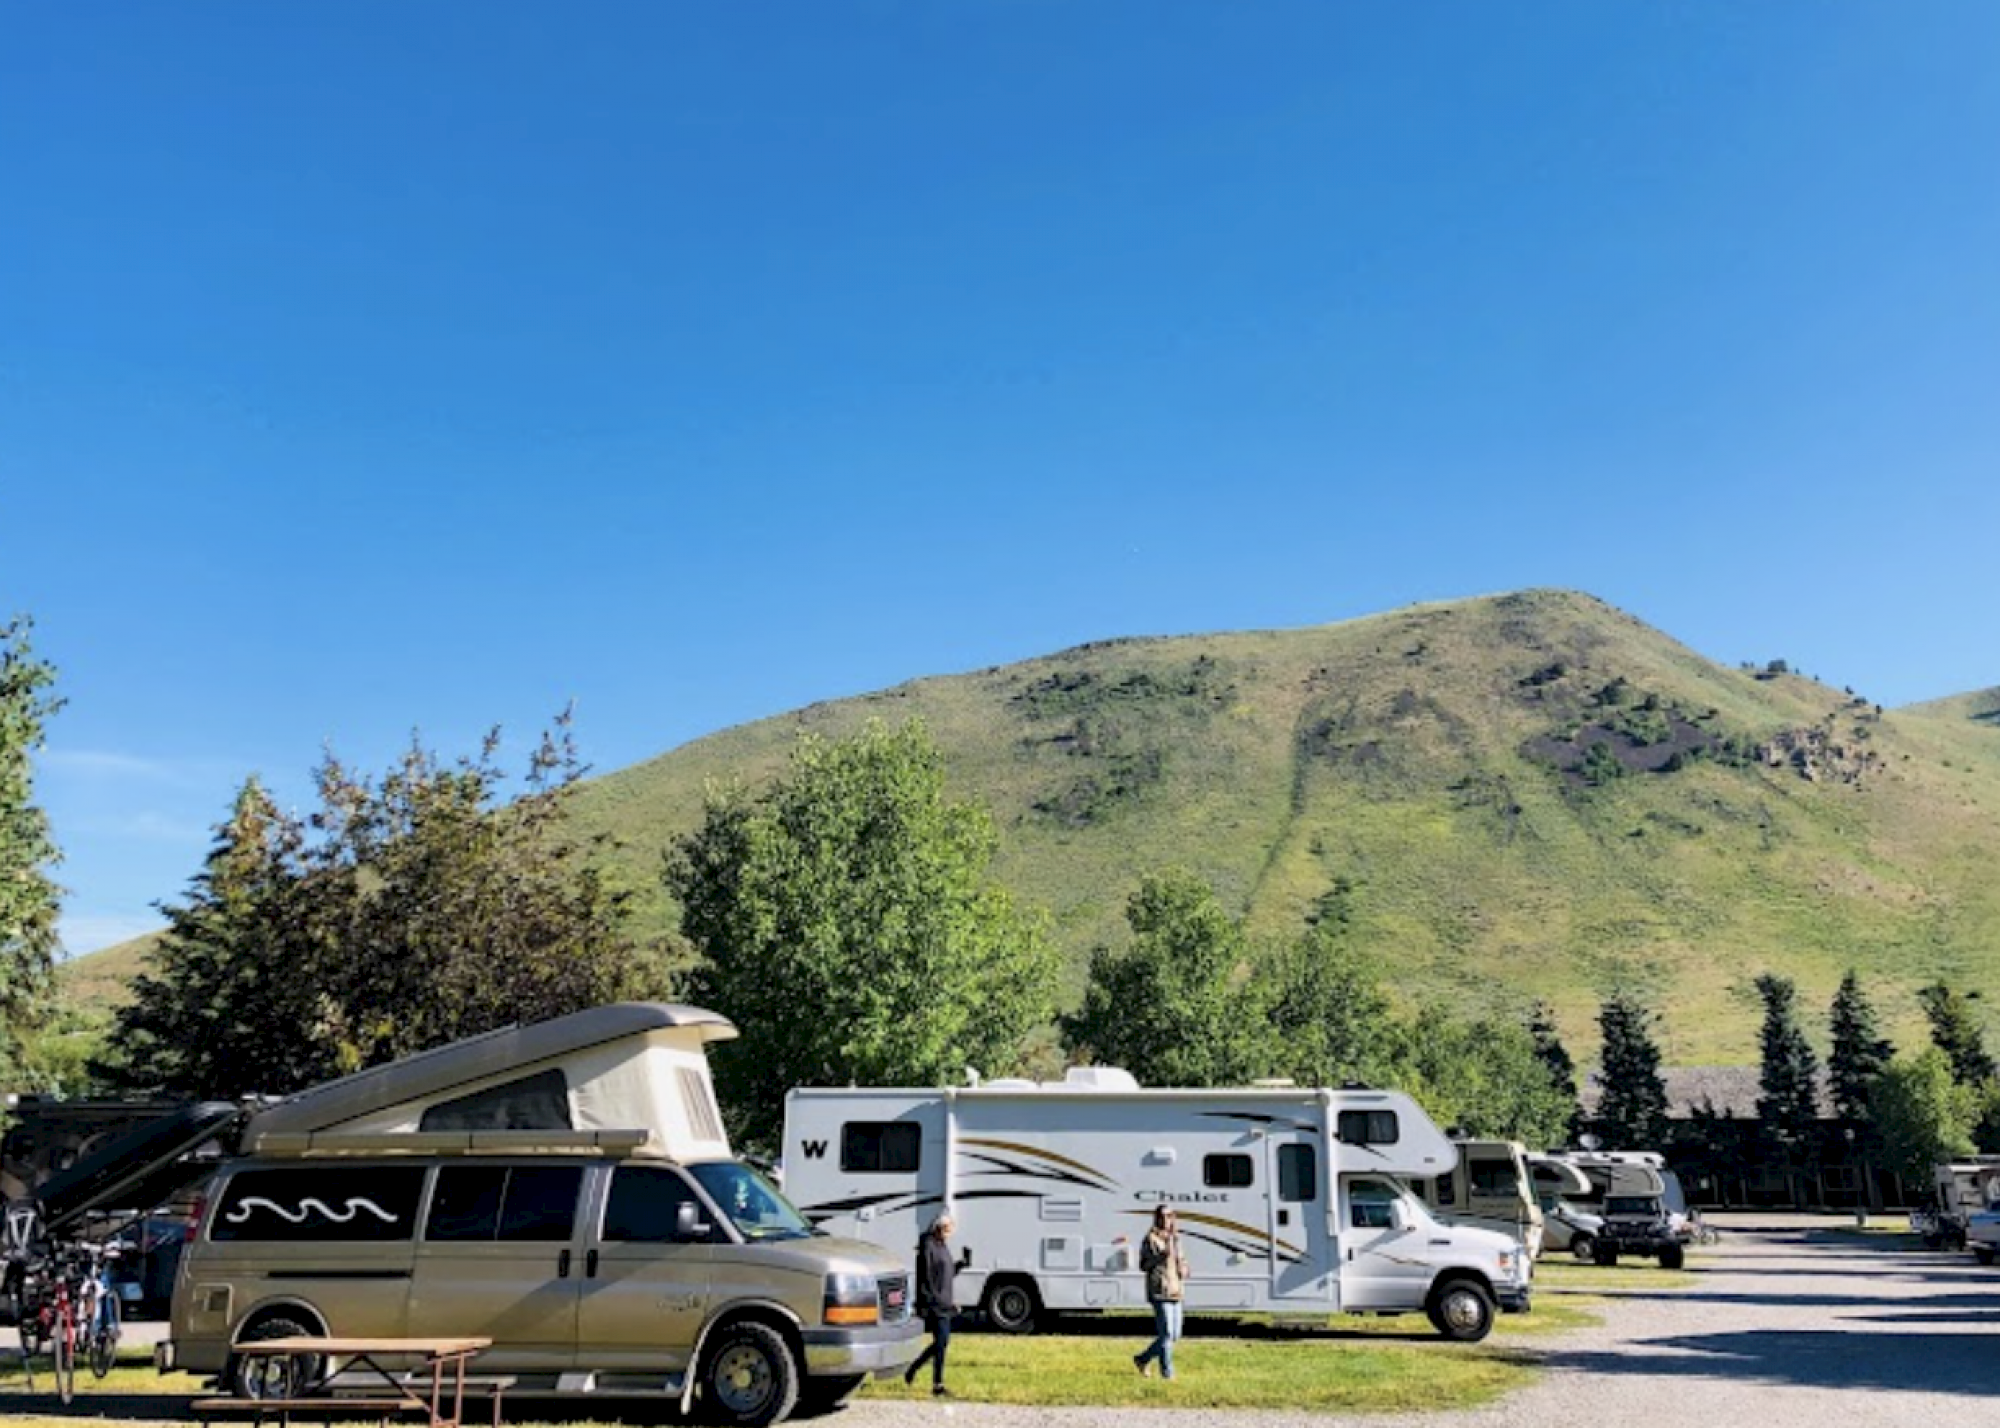 Several RVs are parked in a camping area with a background of green hills under a clear blue sky.